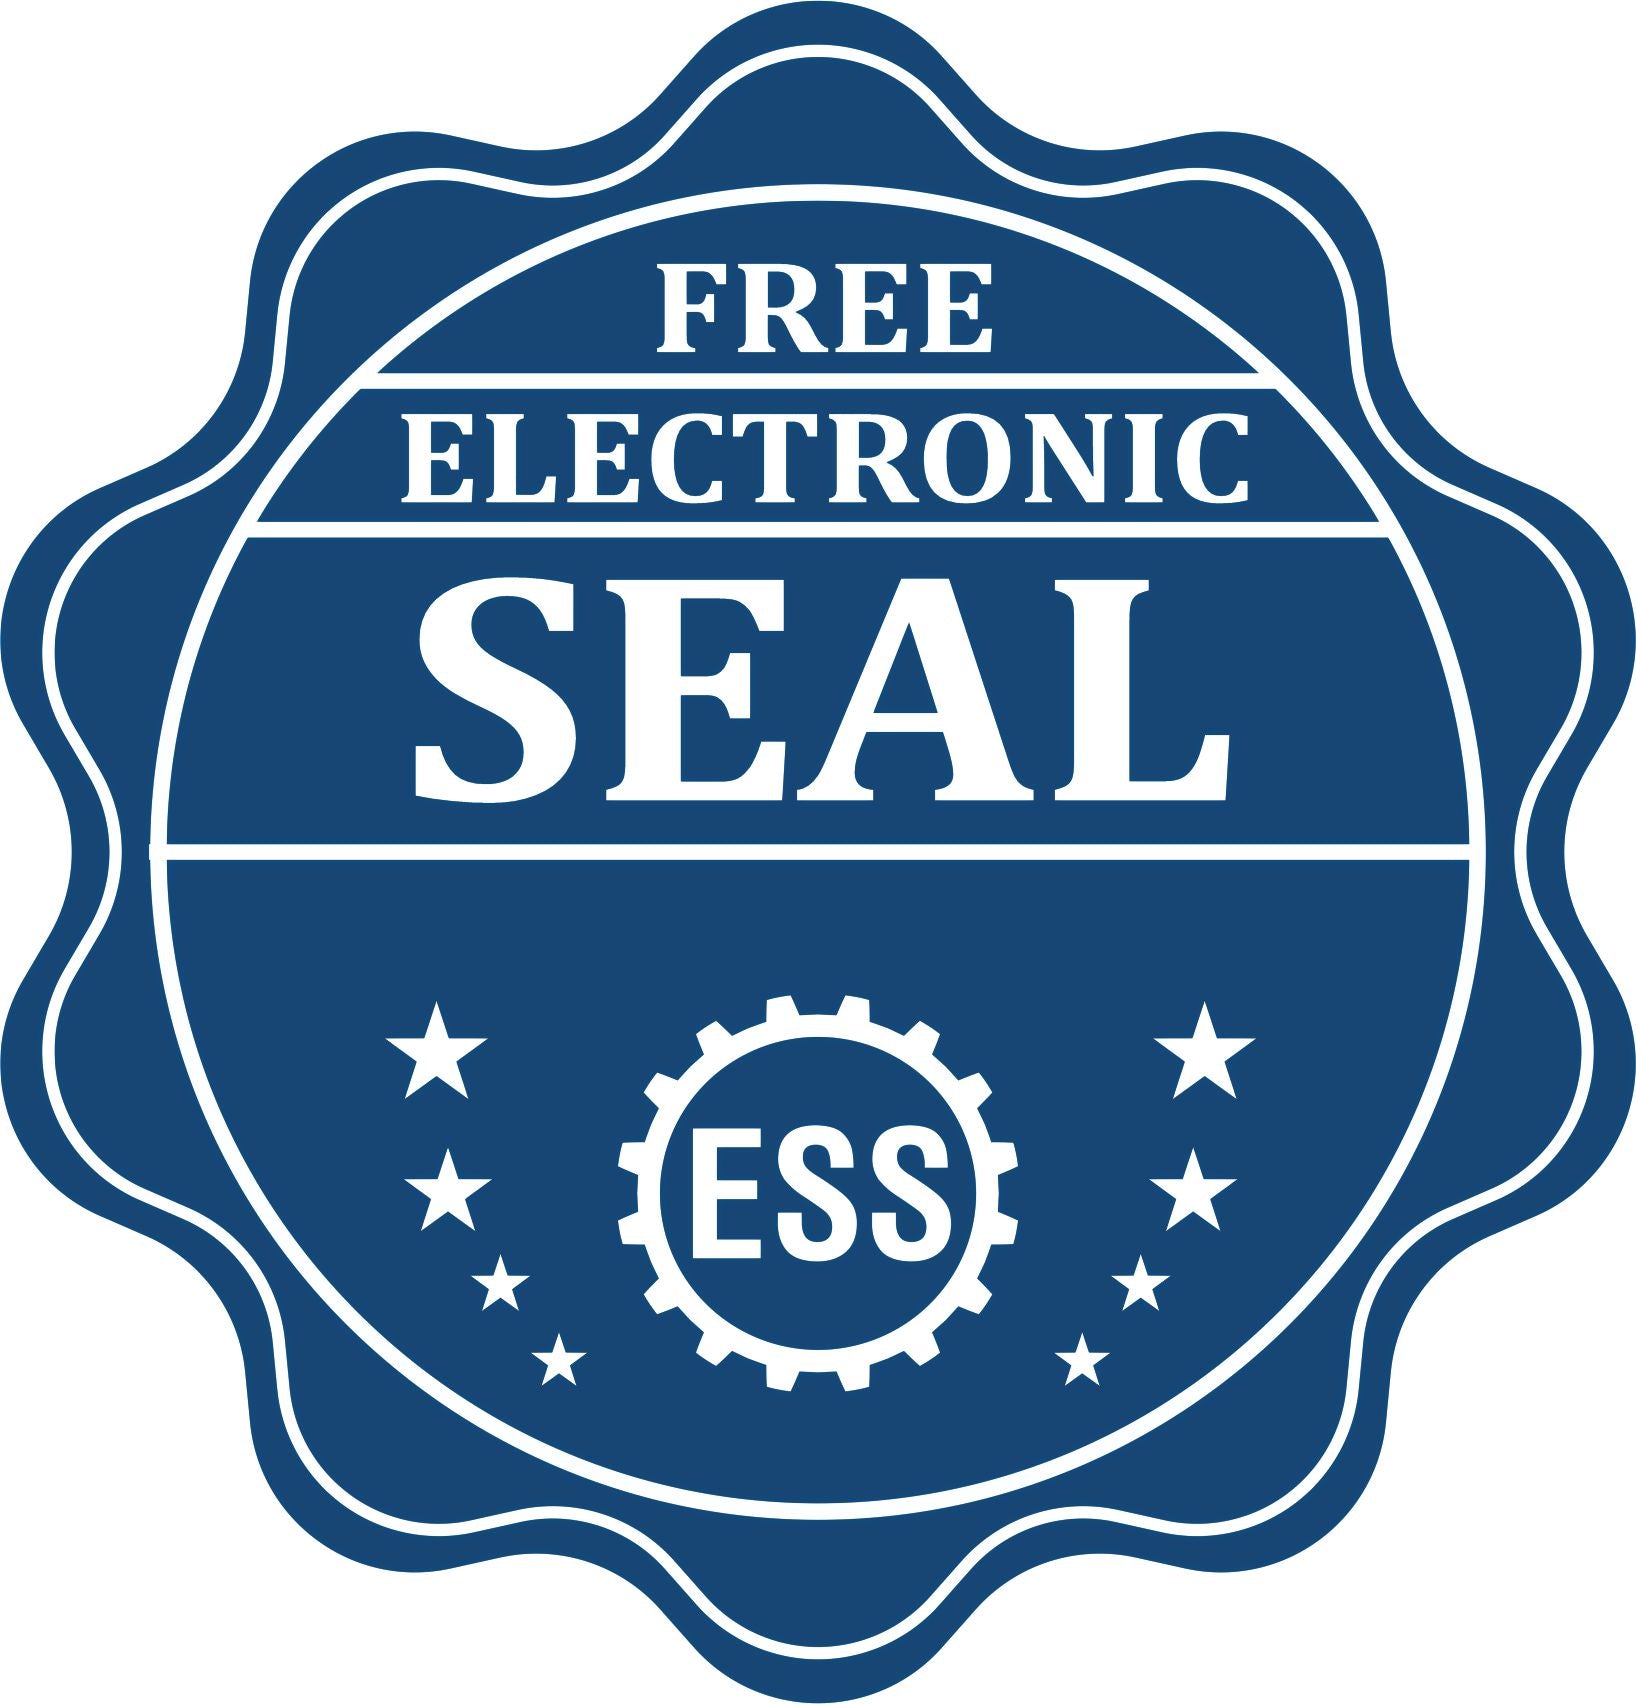 A badge showing a free electronic seal for the Premium MaxLight Pre-Inked Arkansas Landscape Architectural Stamp with stars and the ESS gear on the emblem.